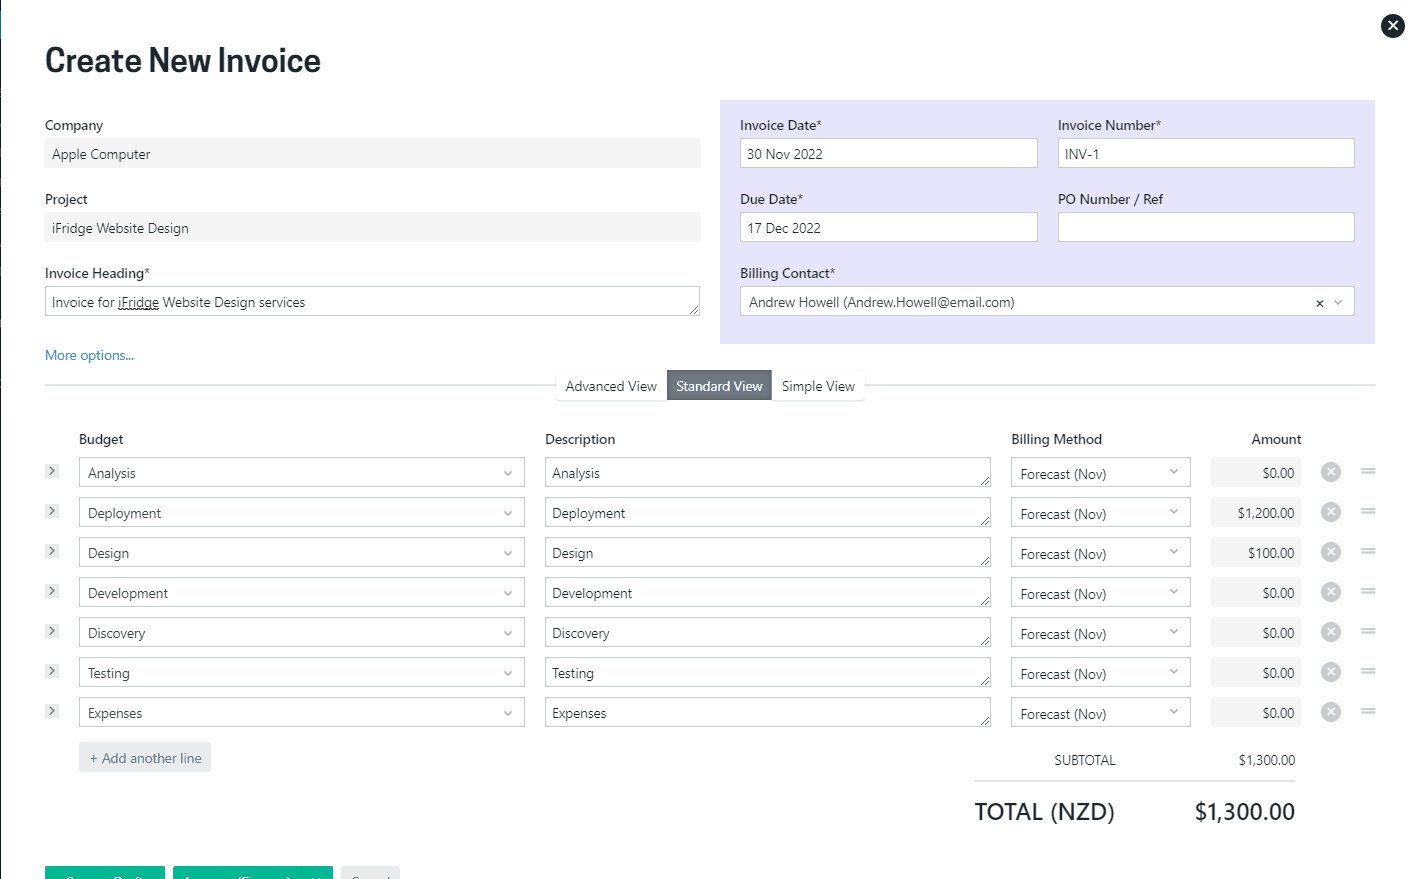 Add billing contact from invoice